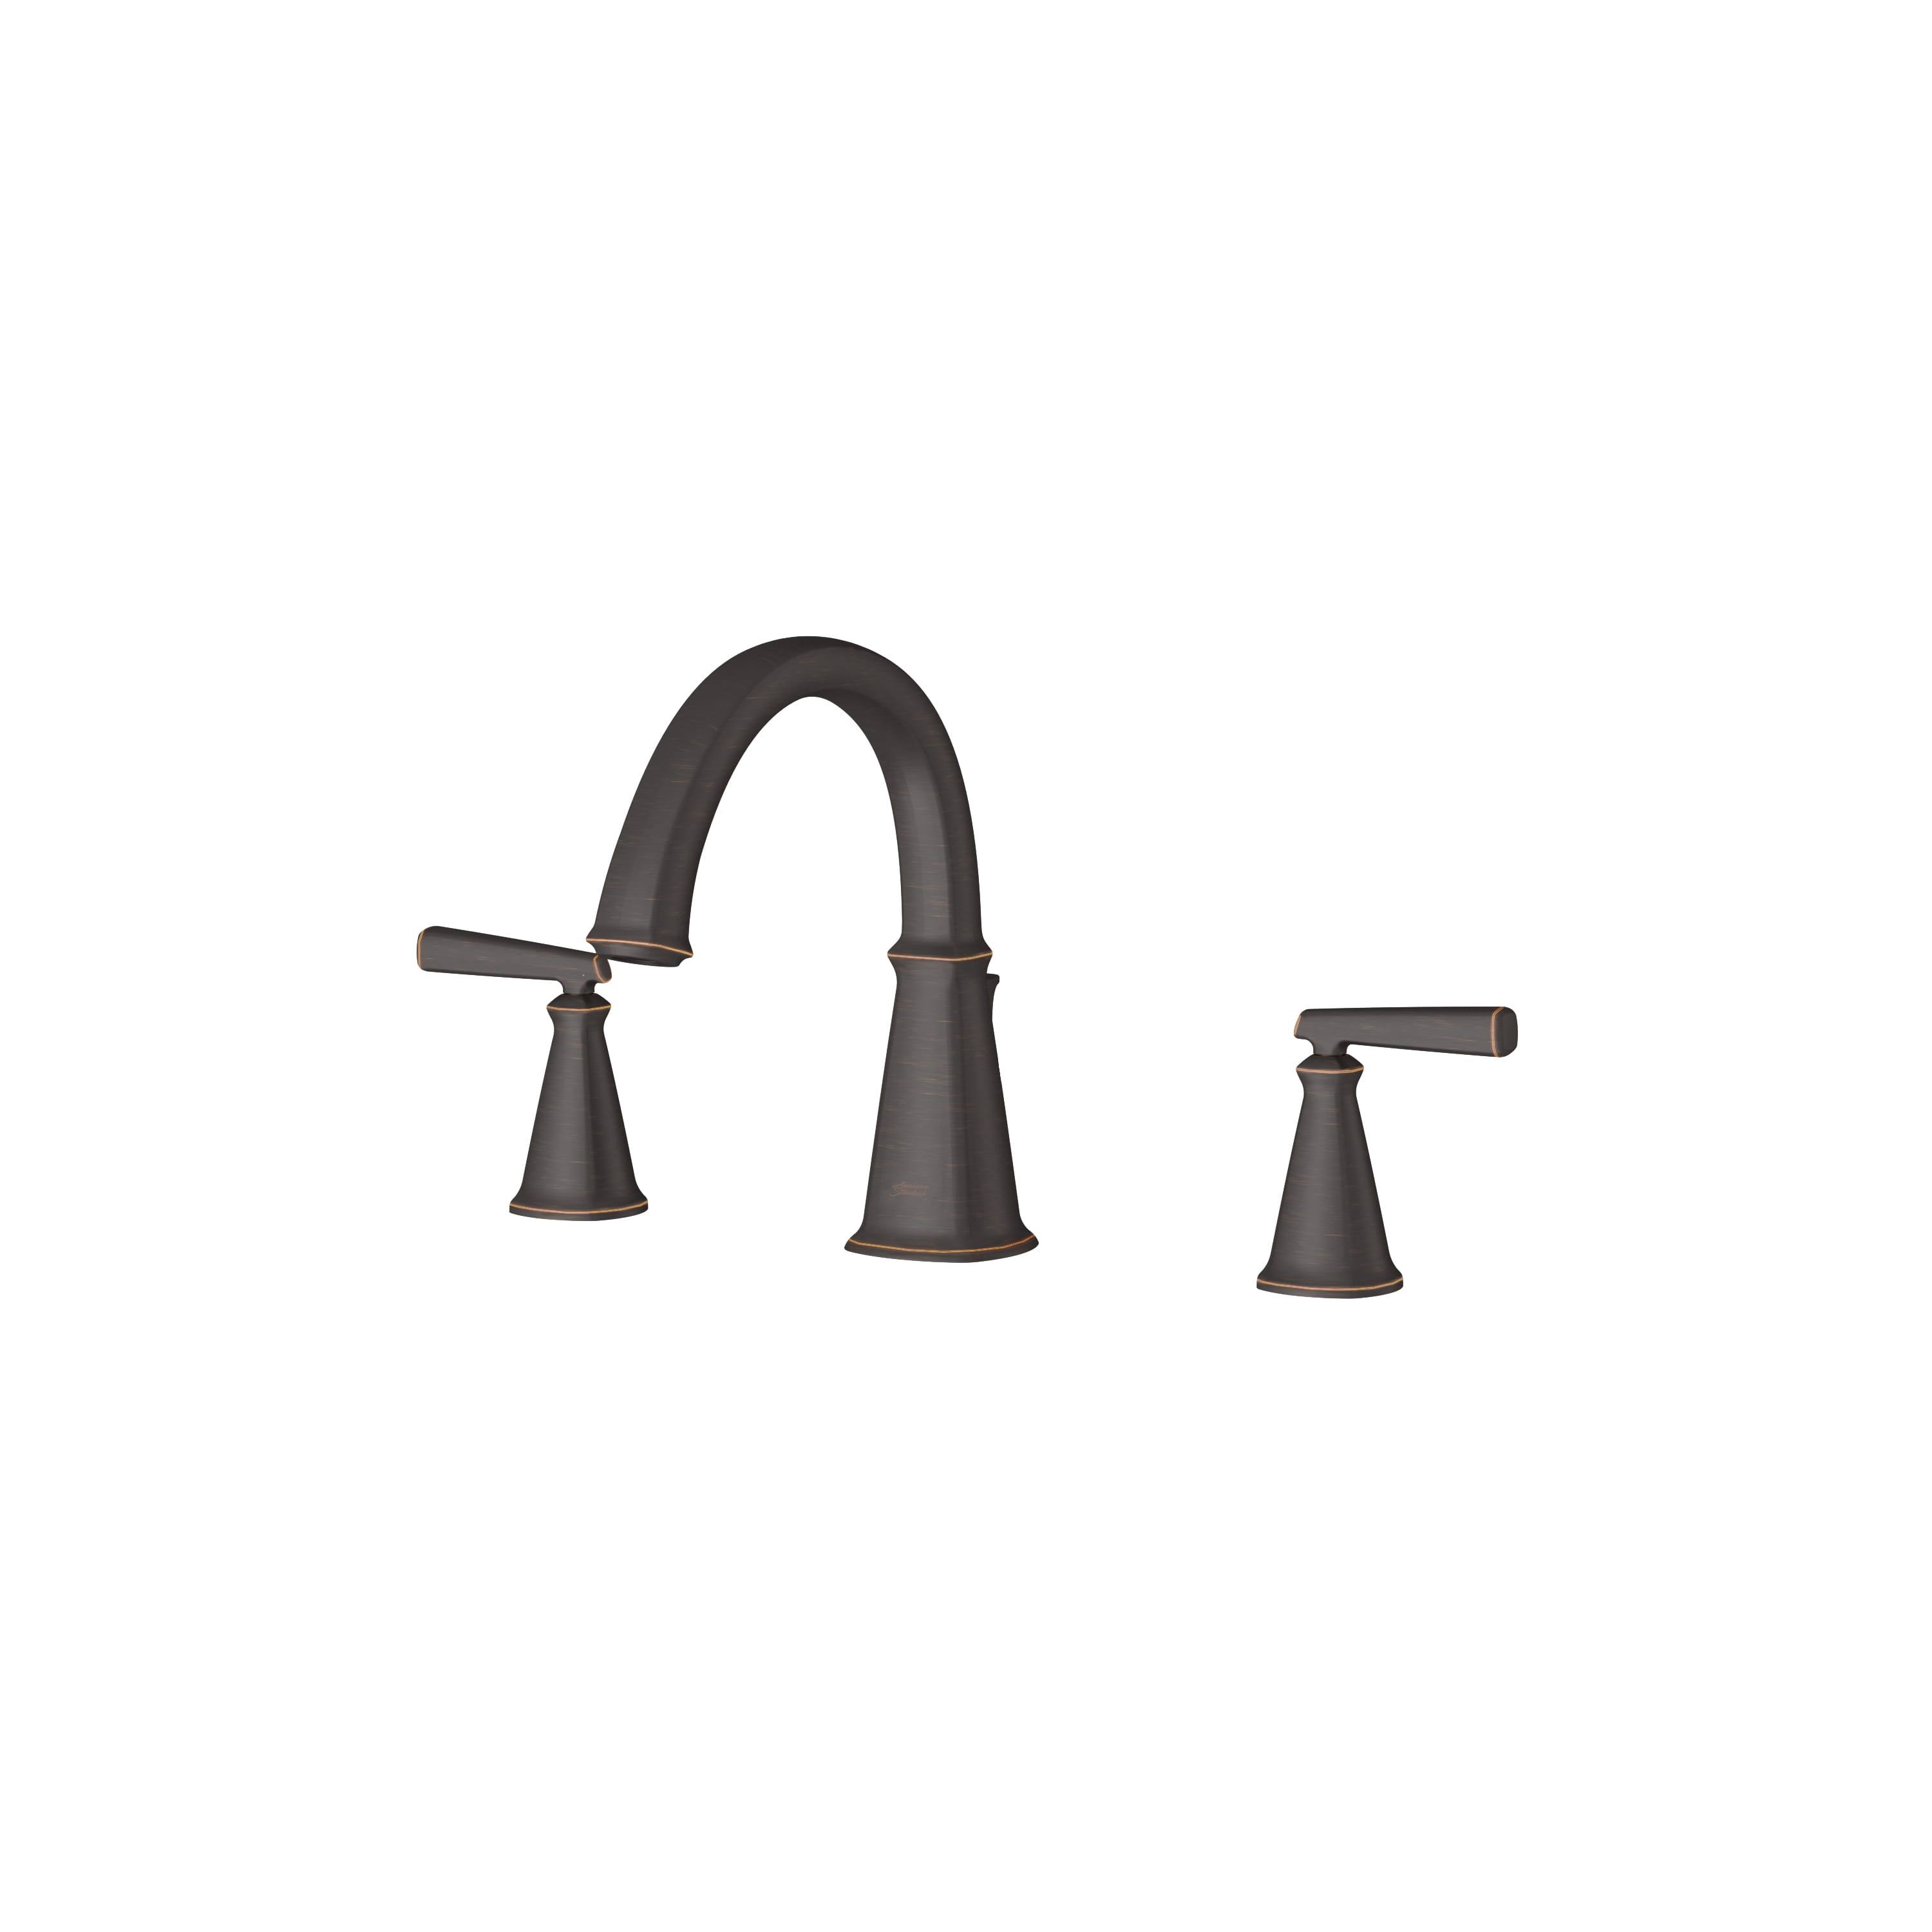 Edgemere Bathtub Faucet With Lever Handles for Flash Rough In Valve LEGACY BRONZE